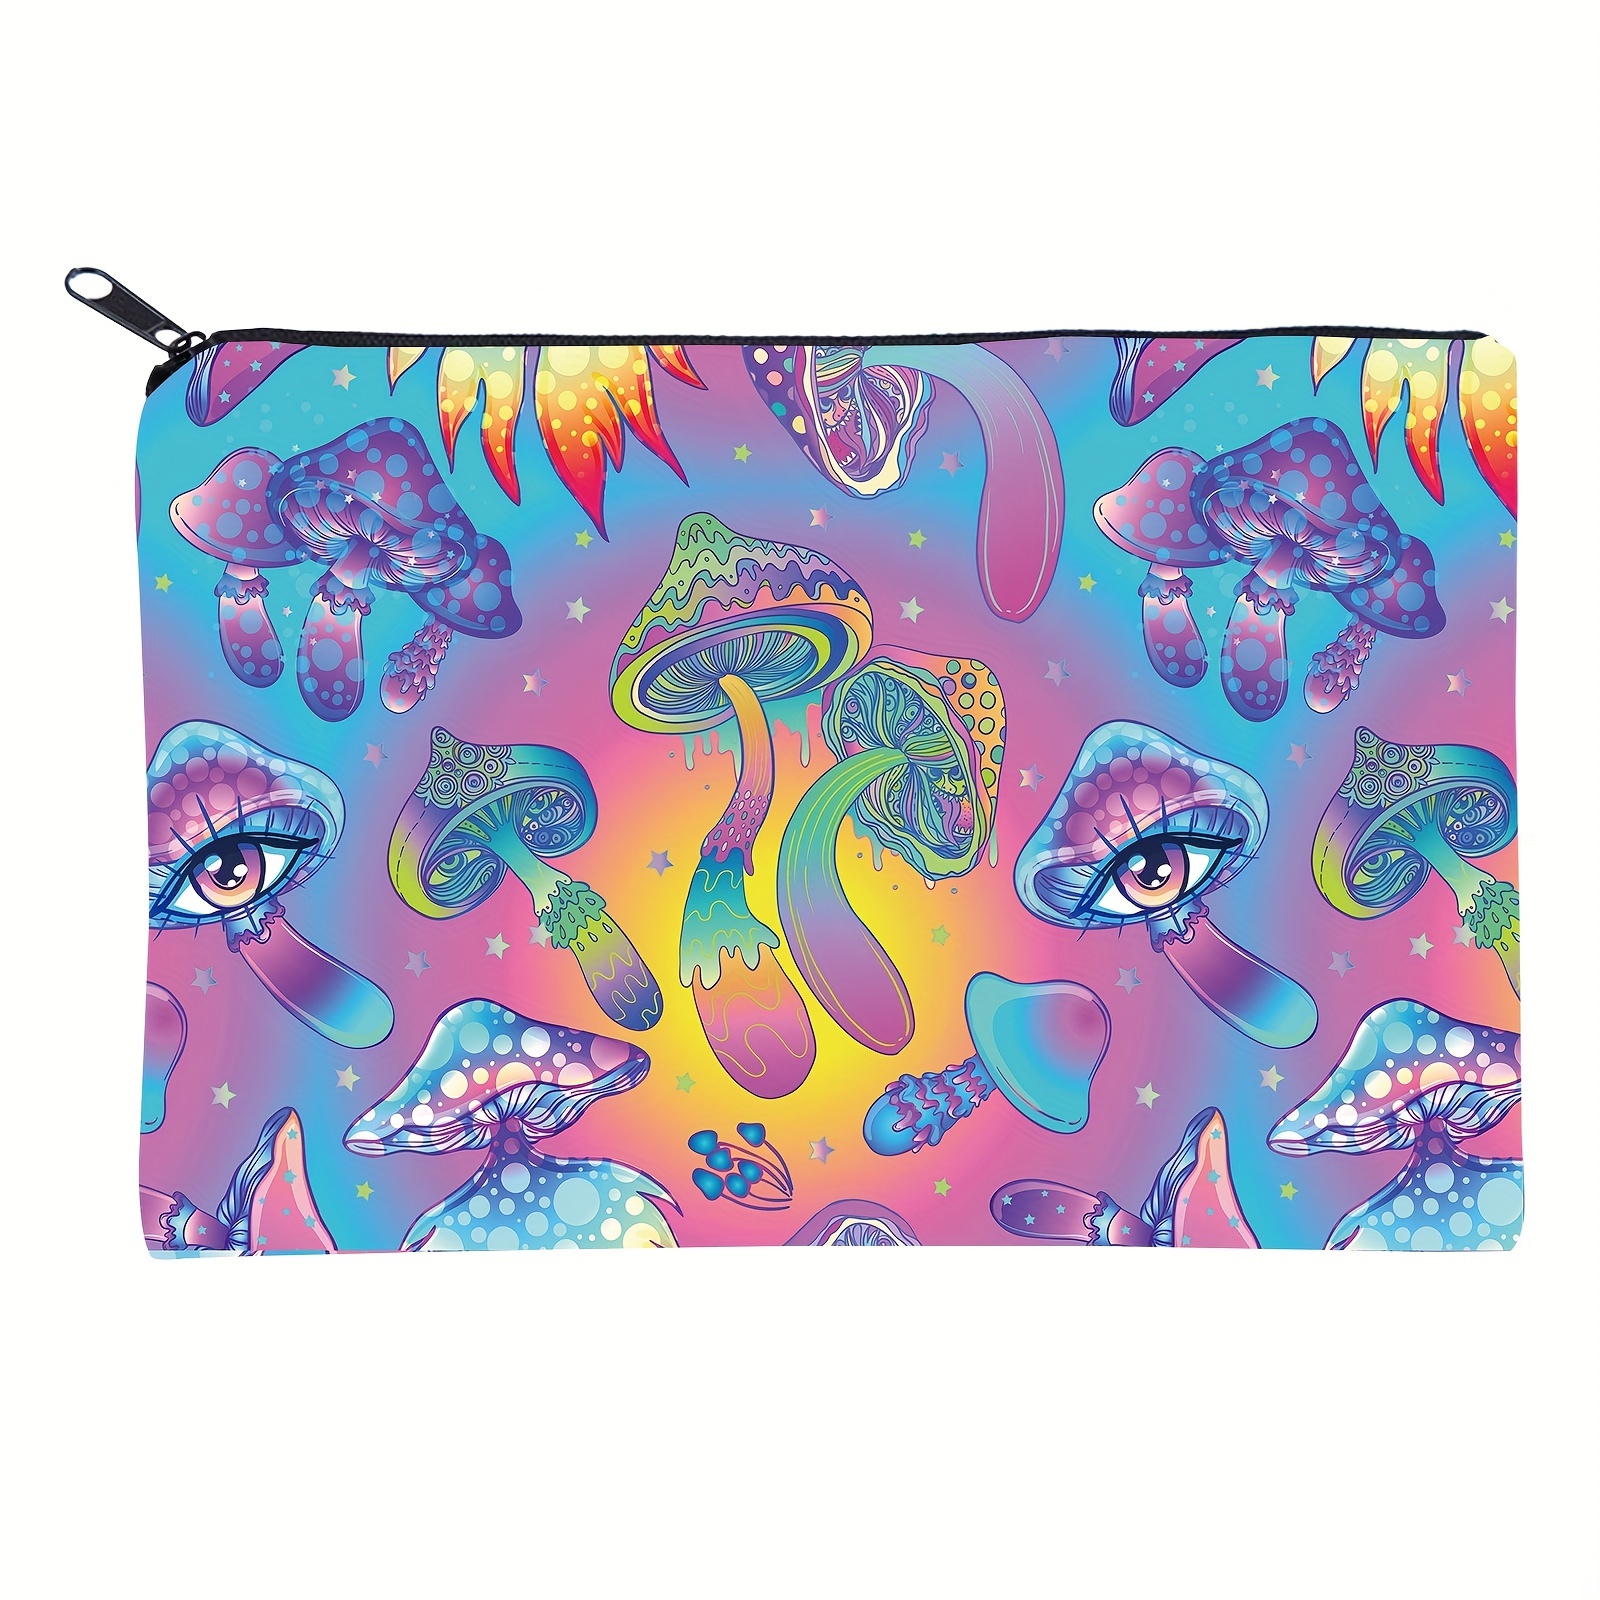 Colorful Mushroom Print Makeup Bag: Perfect Travel Accessory for Ladies and Teen Girls